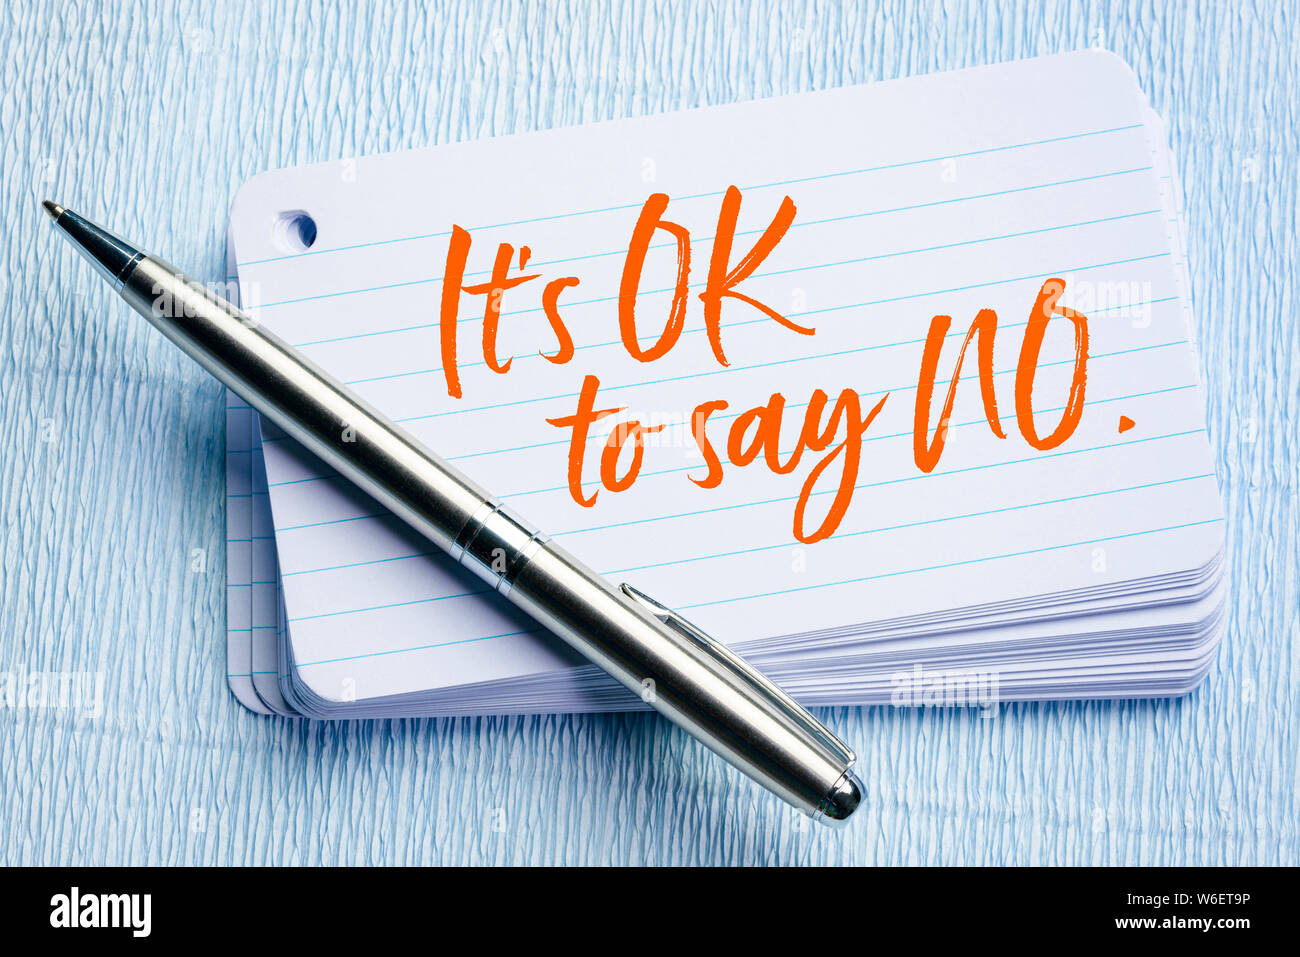 It is OK to say NO - handwriting on a stack of index cards Stock Photo